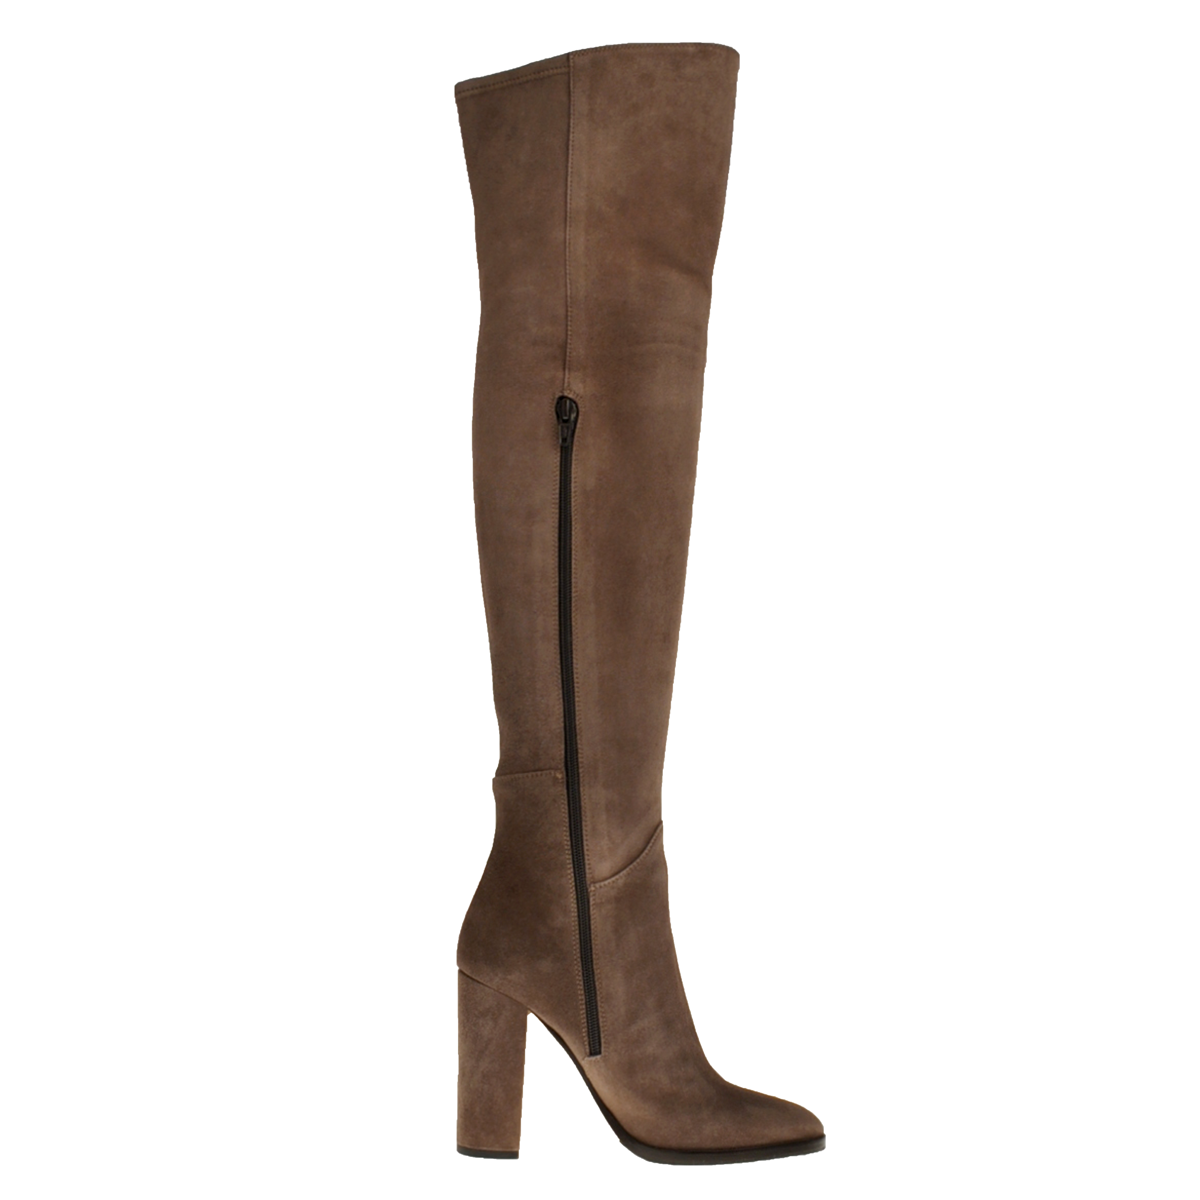 Over Knee High Heeled Boots in Taupe Suede